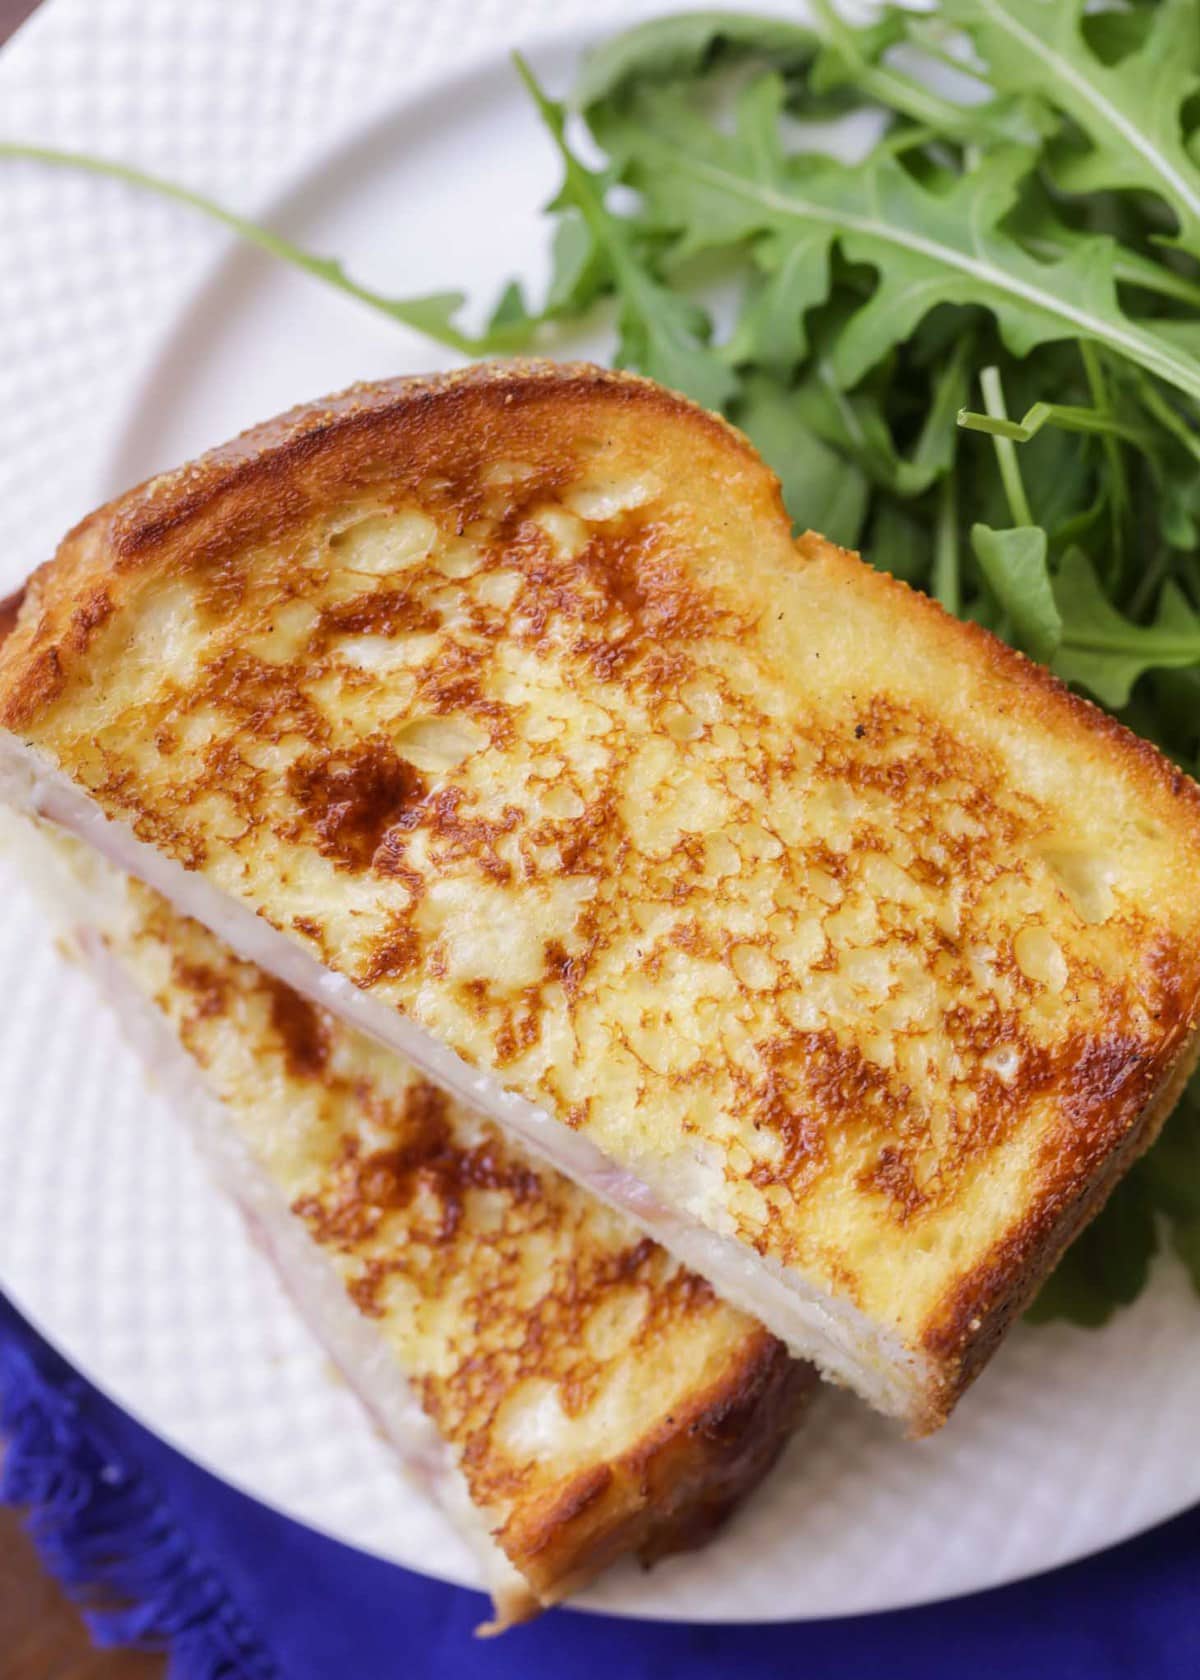 Easy Croque Monsieur recipe served with arugula on the side.